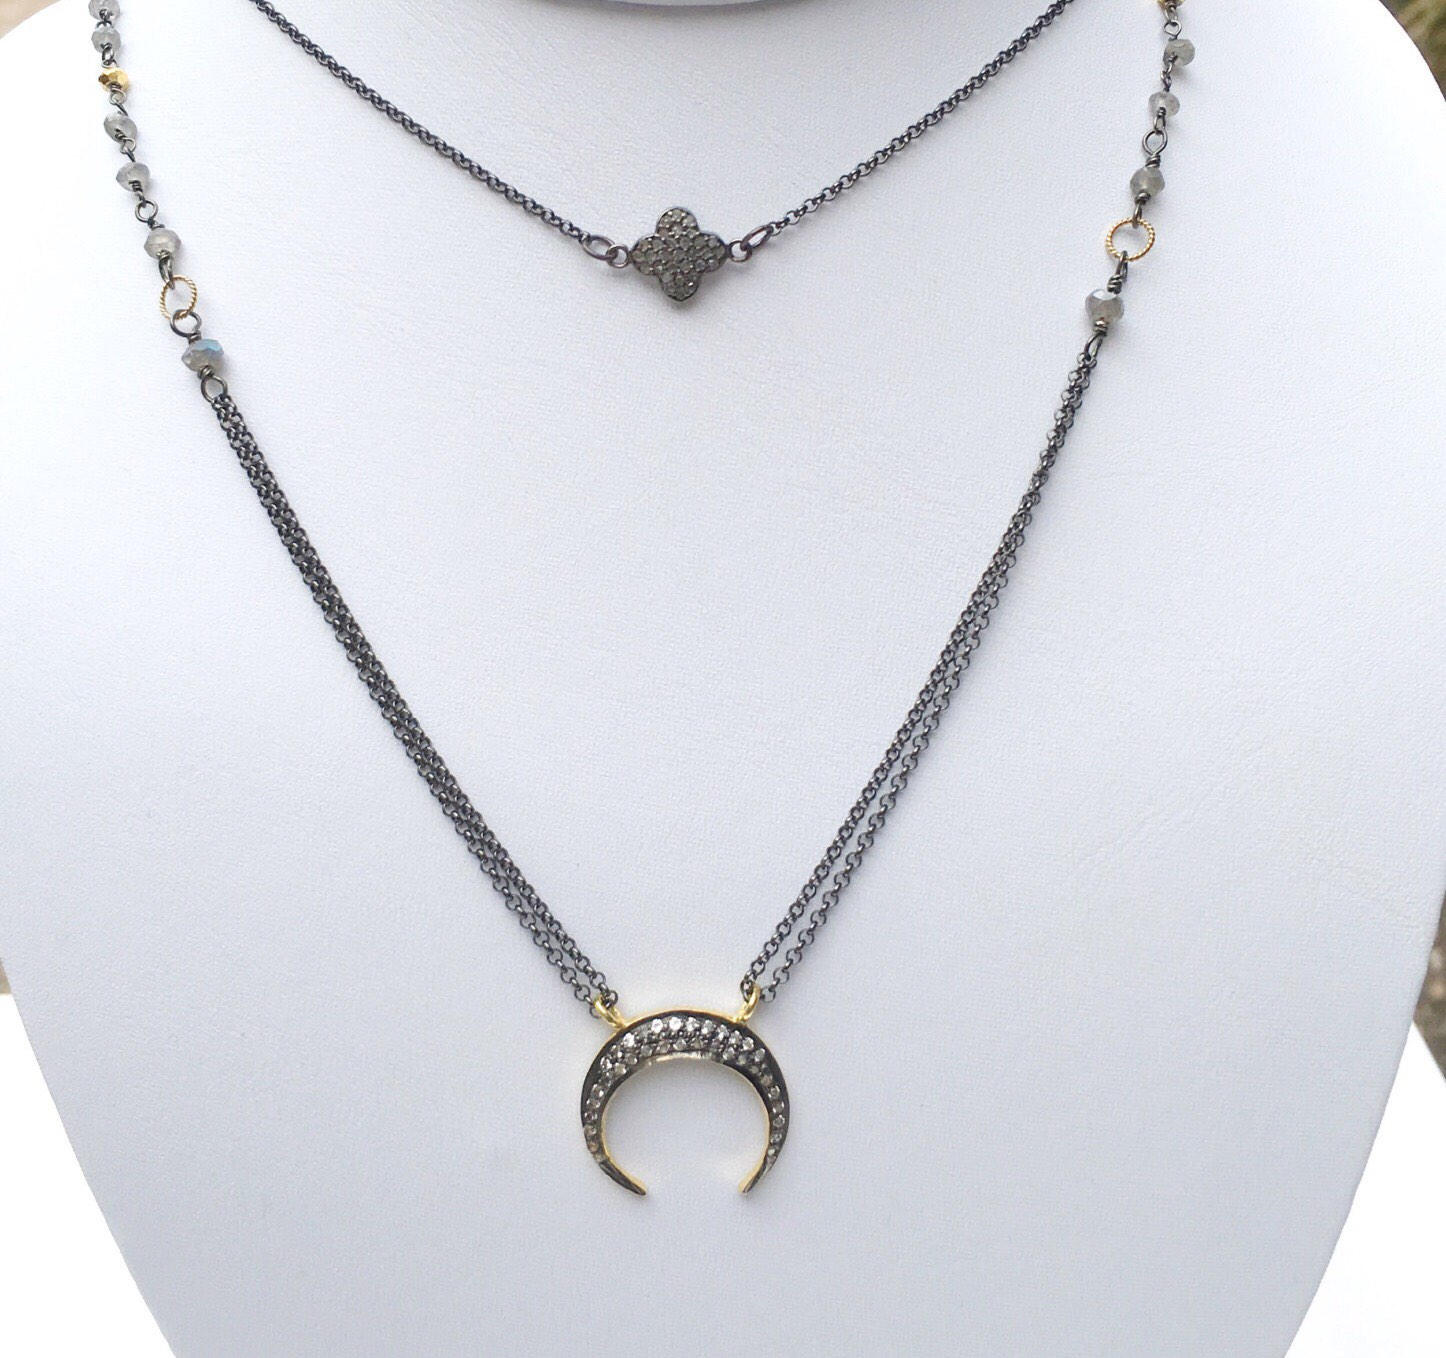 Pave Crescent Moon in White Topaz Necklace on Labradorite | Etsy